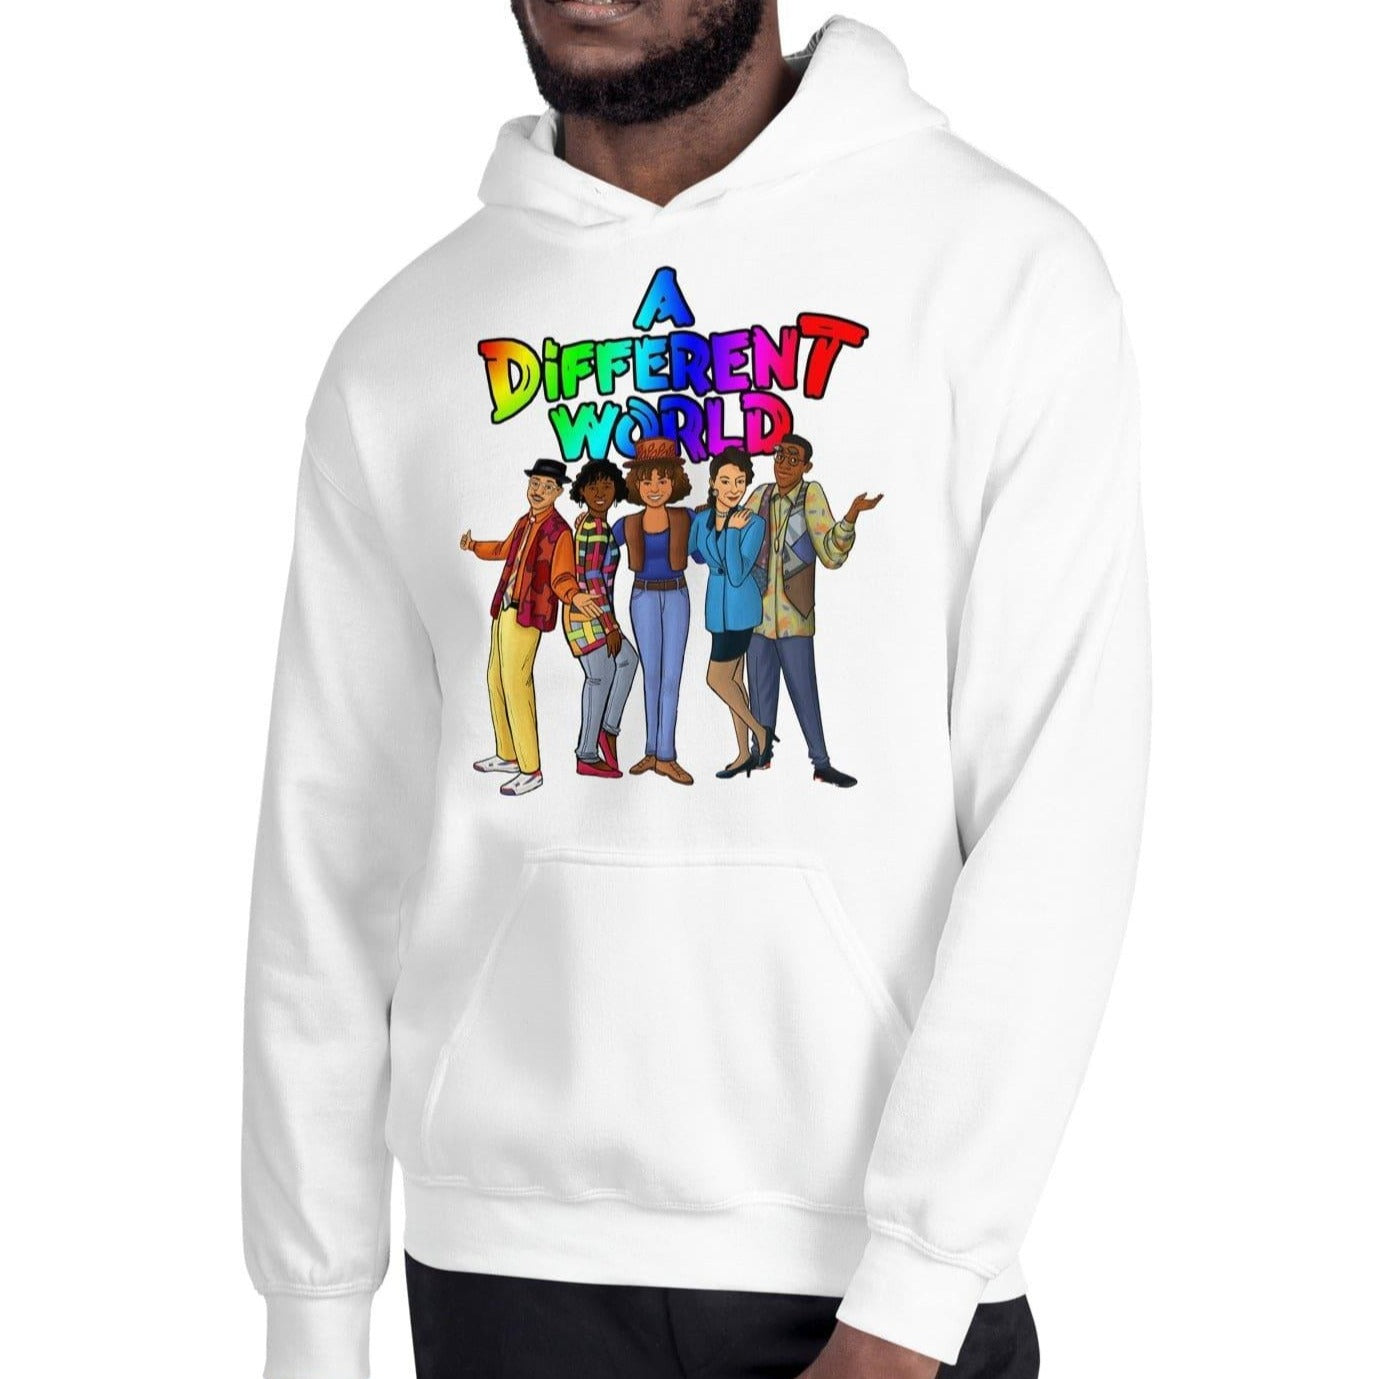 A Different World Hoodie 80's TV Sitcom Animated Pullover - TopKoalaTee